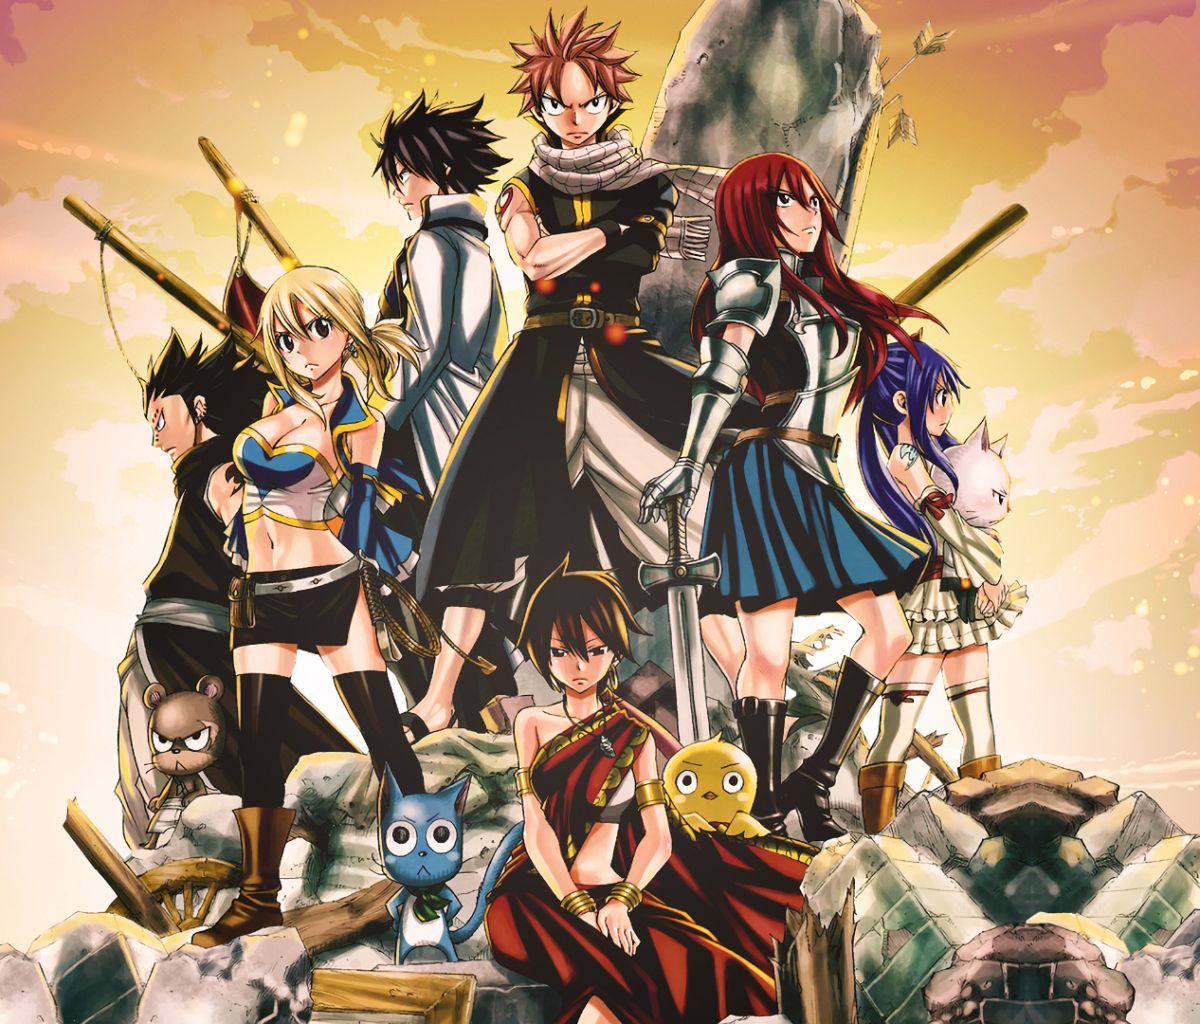 Download mobile wallpaper Anime, Lucy Heartfilia, Natsu Dragneel, Erza Scarlet, Gray Fullbuster, Happy (Fairy Tail), Gajeel Redfox, Charles (Fairy Tail), Éclair (Fairy Tail), Wendy Marvell, Momon (Fairy Tail), Panther Lily (Fairy Tail), Fairy Tail The Movie: Phoenix Priestess for free.